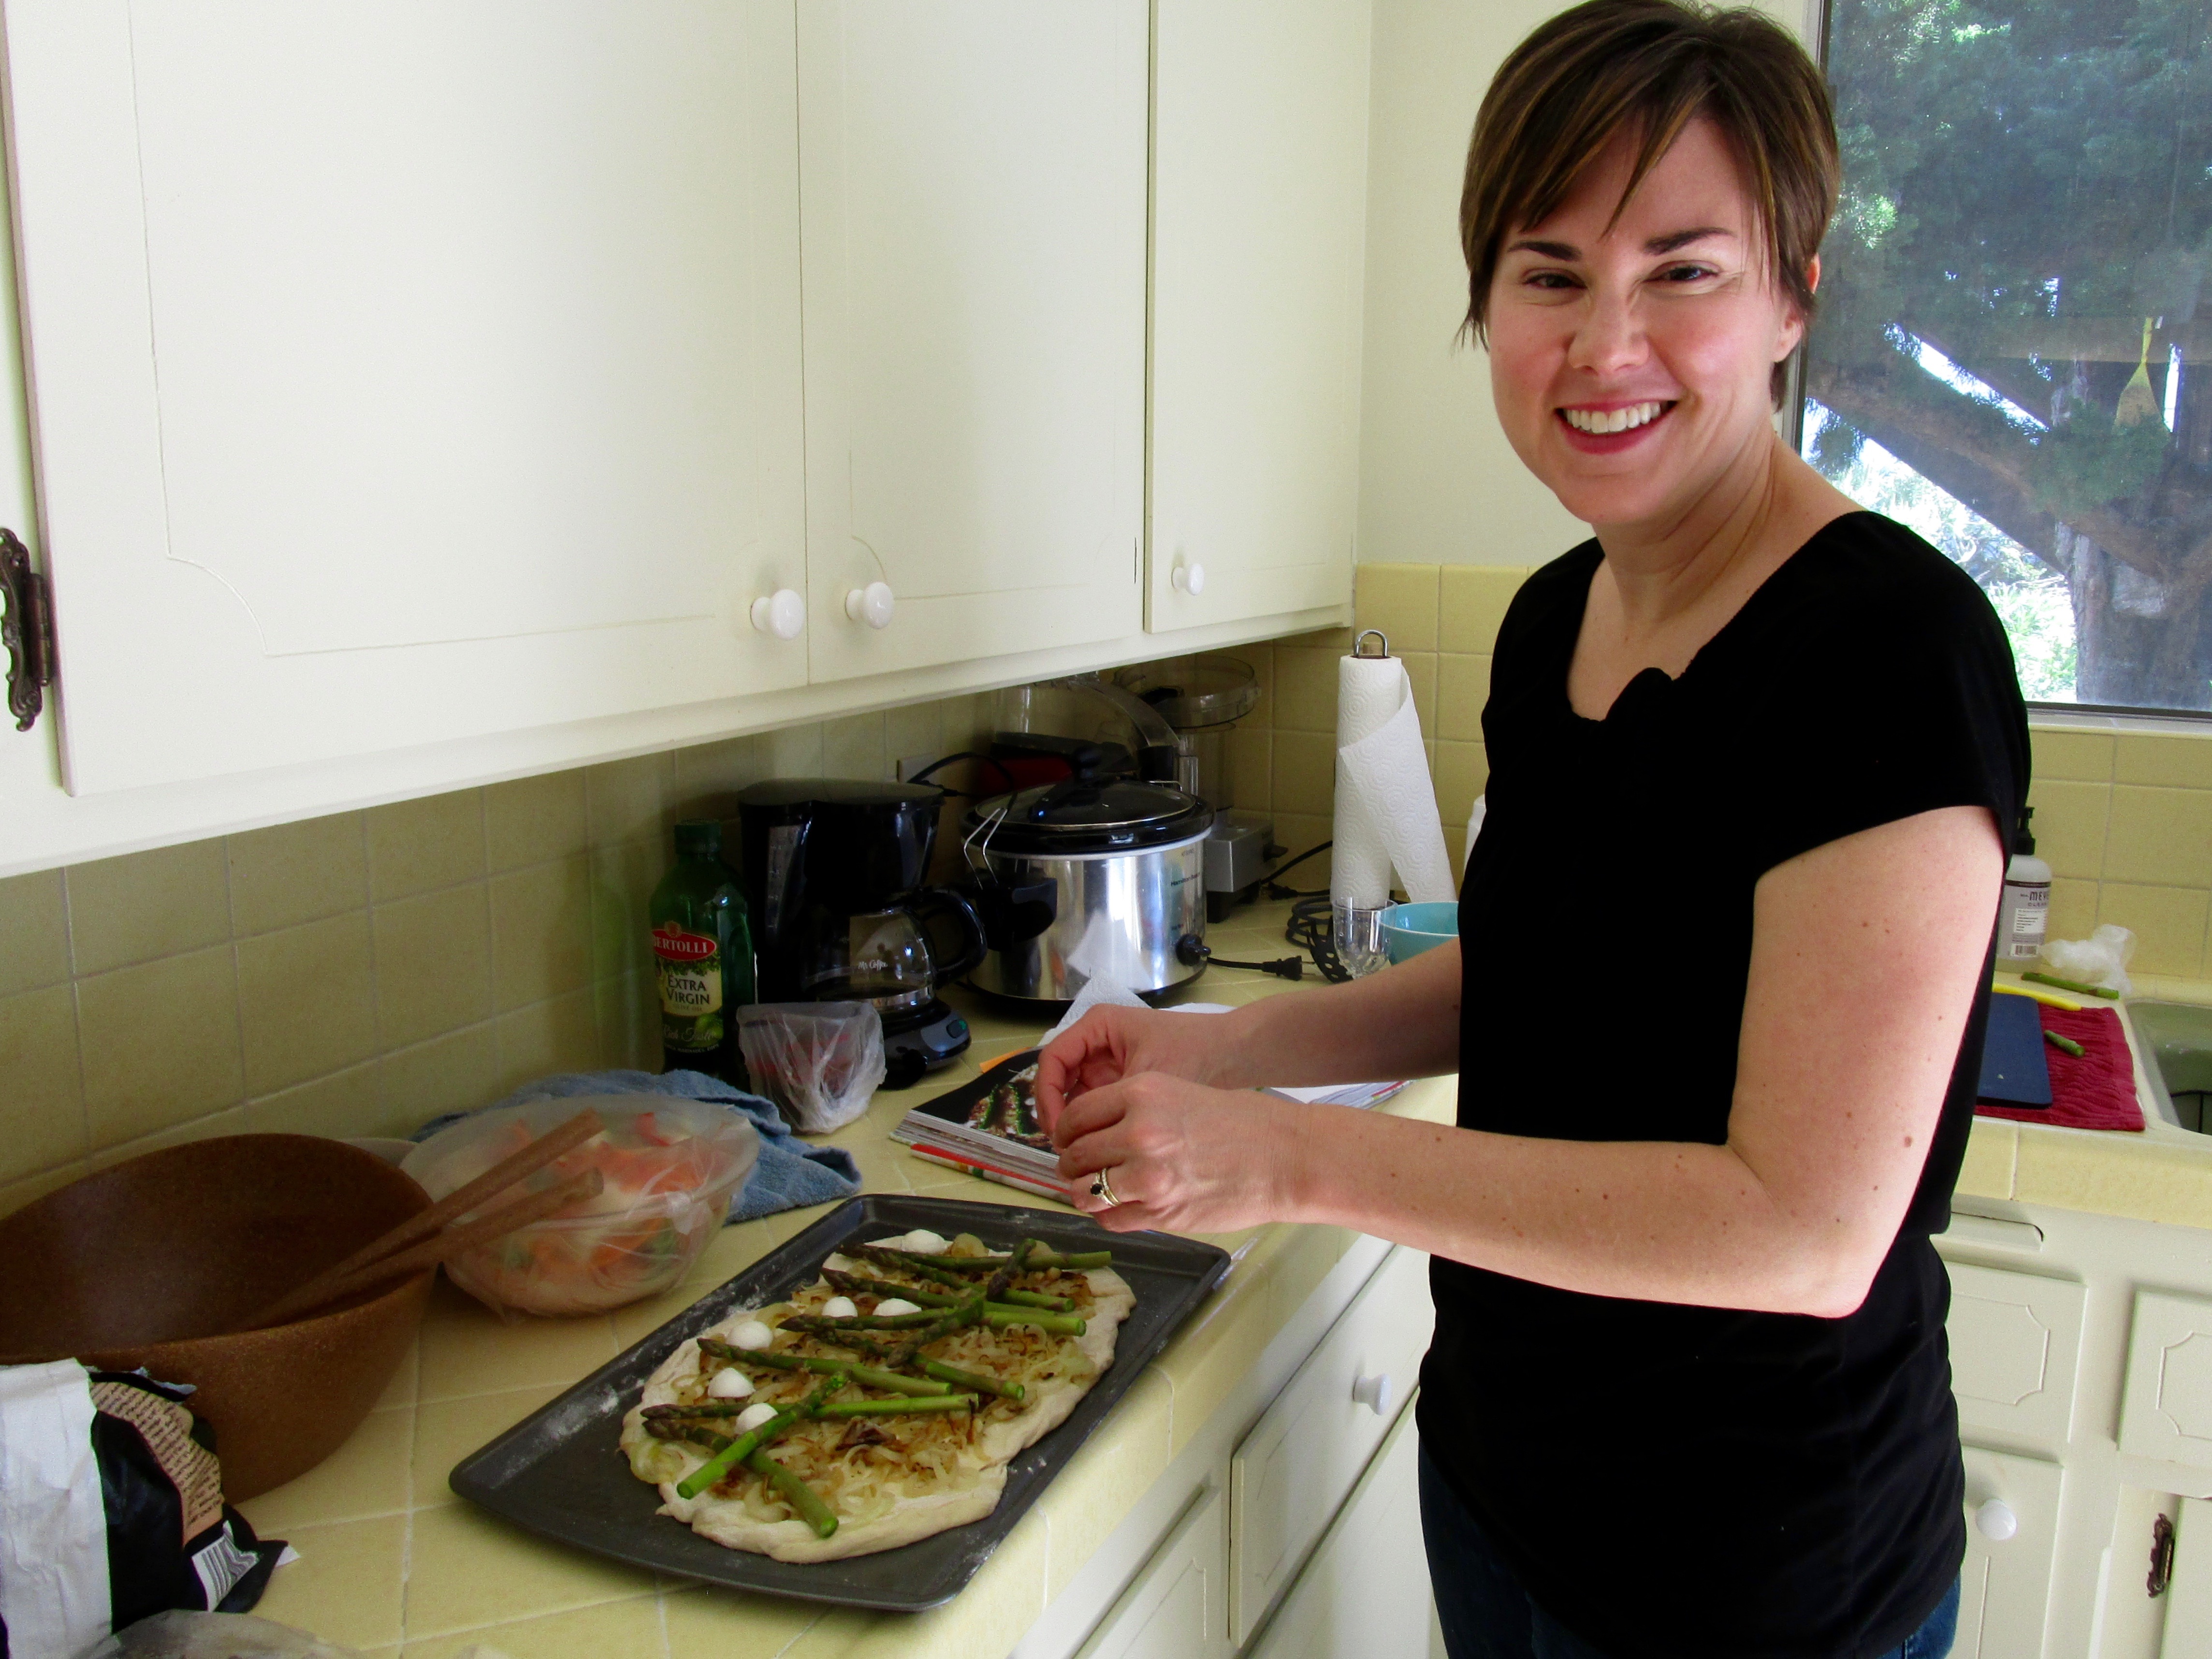 Katie Baillargeon, a UC Santa Barbara prof  and her family came for lunch. Our menu ibcluded Asparagus Pizza from River Cottage Veg.